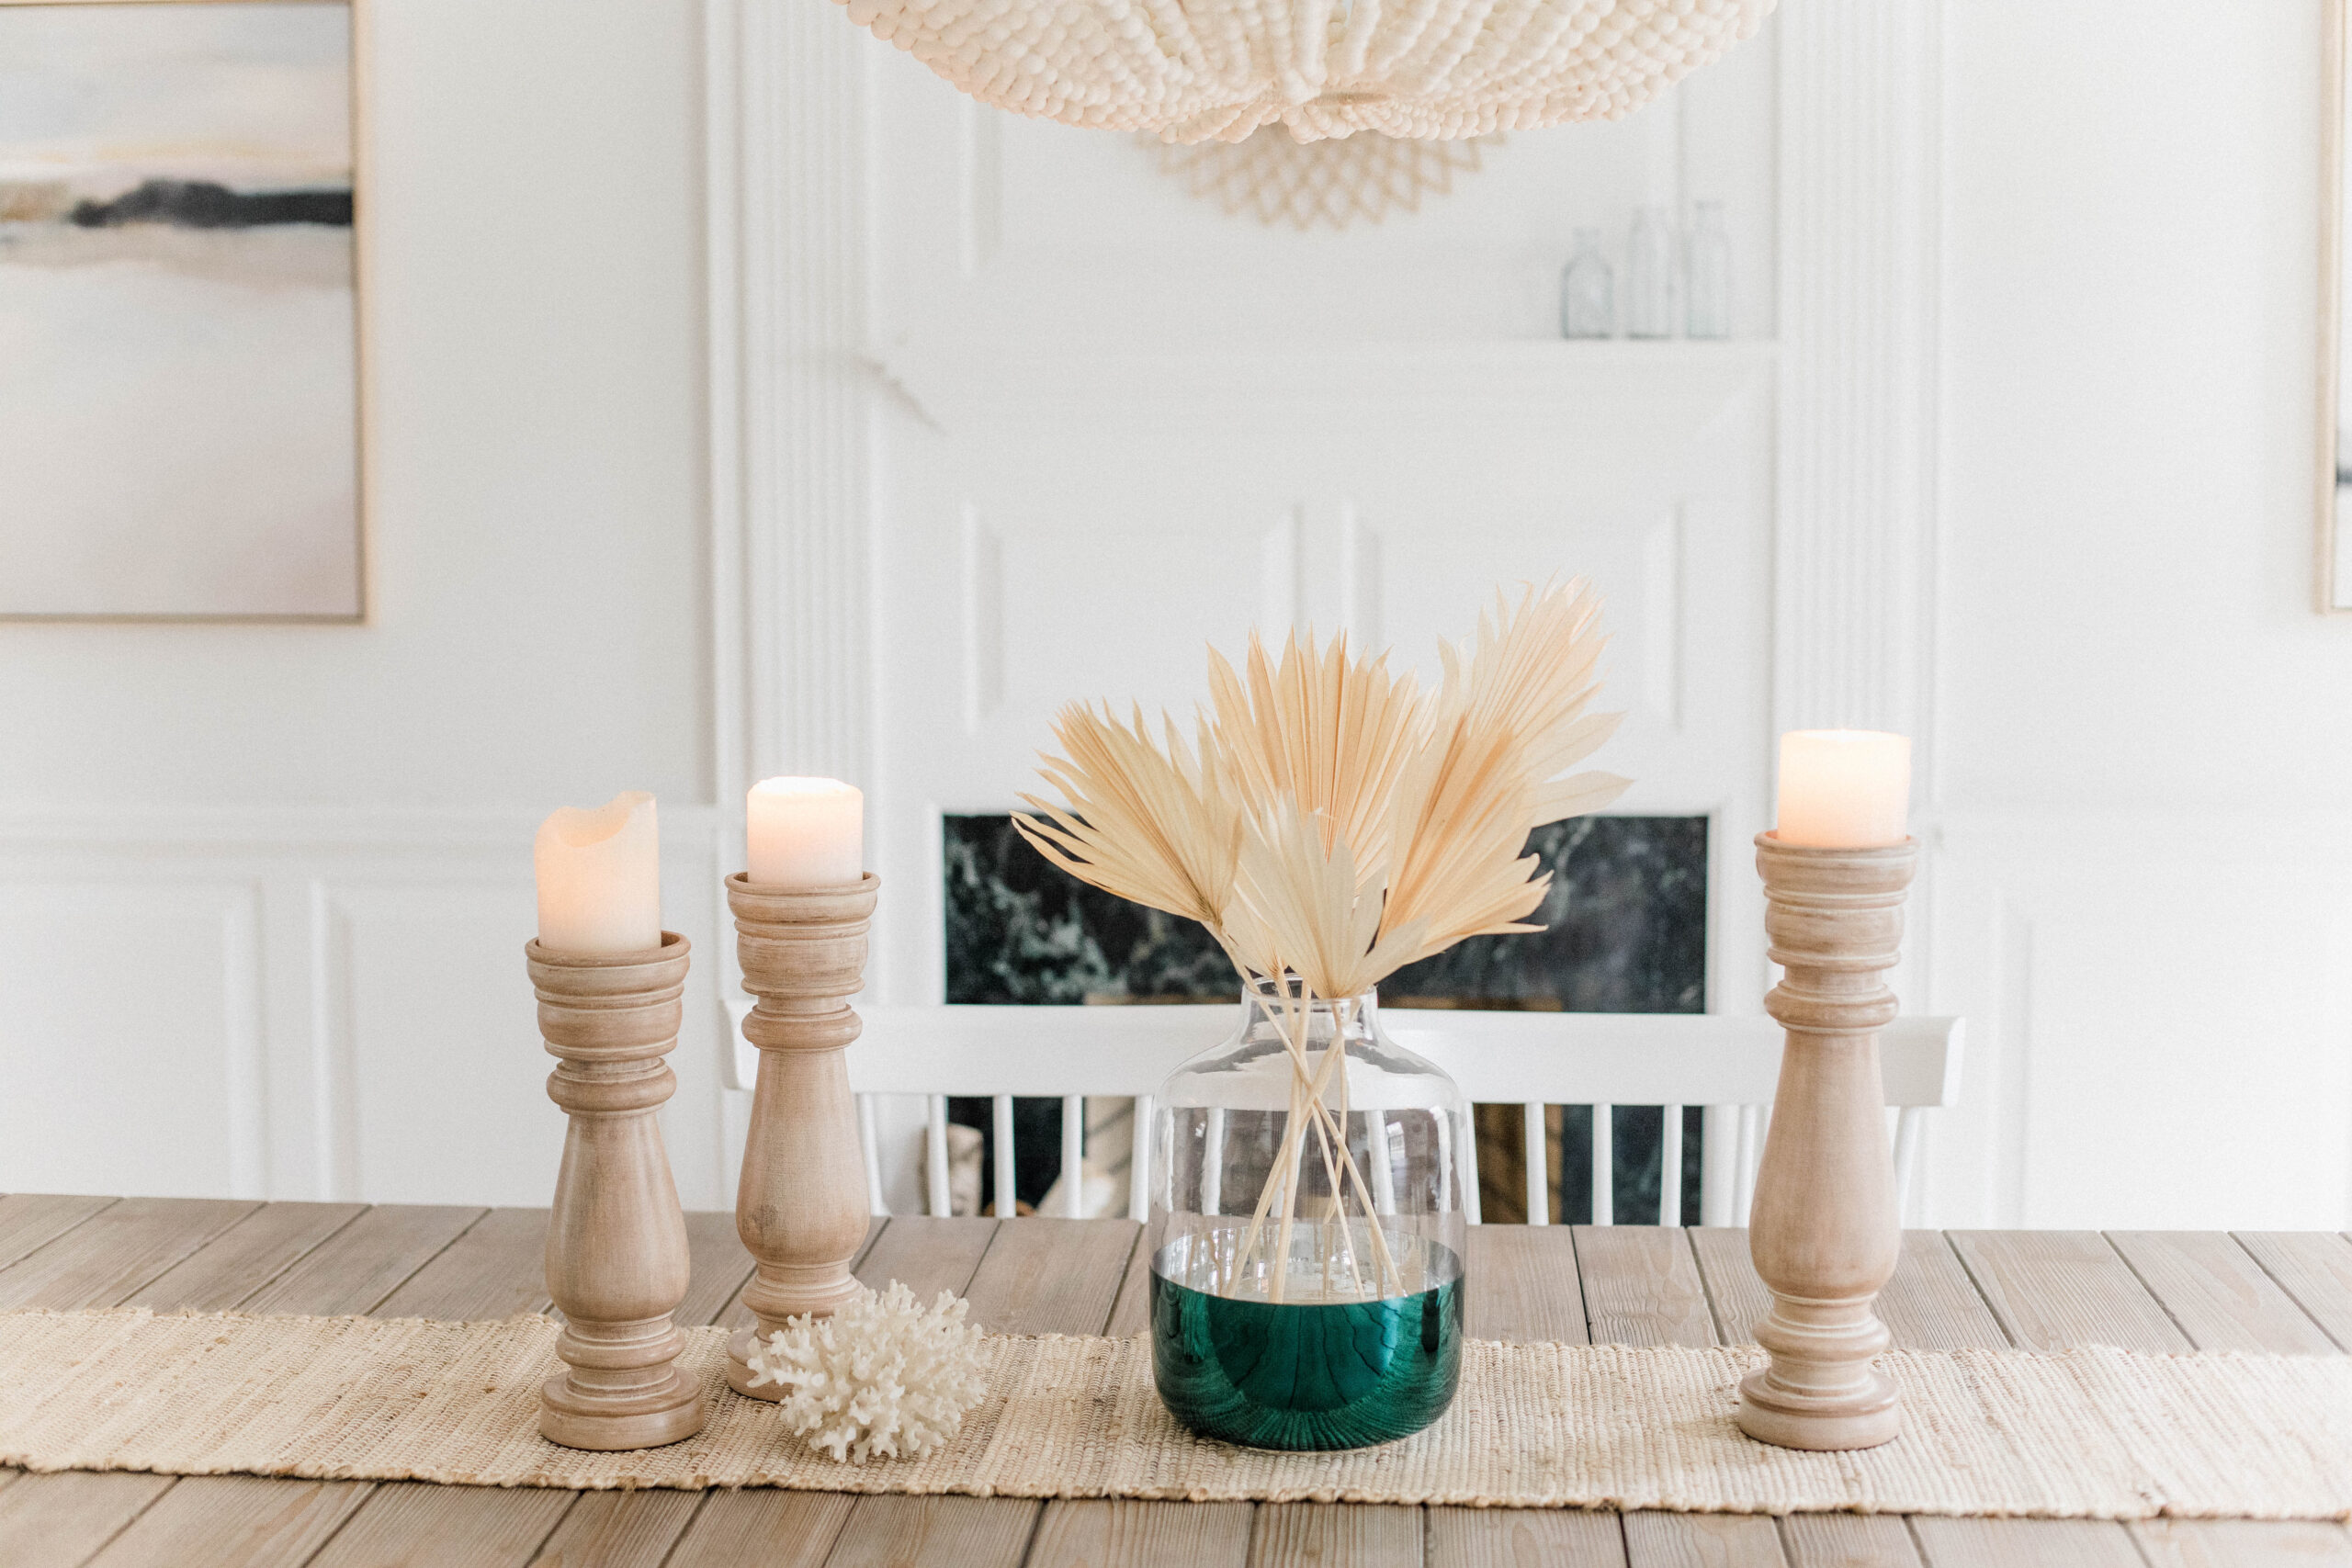 Looking for styling inspiration? Connecticut life and style blogger Lauren McBride shares three ways to style a vase from her QVC line.